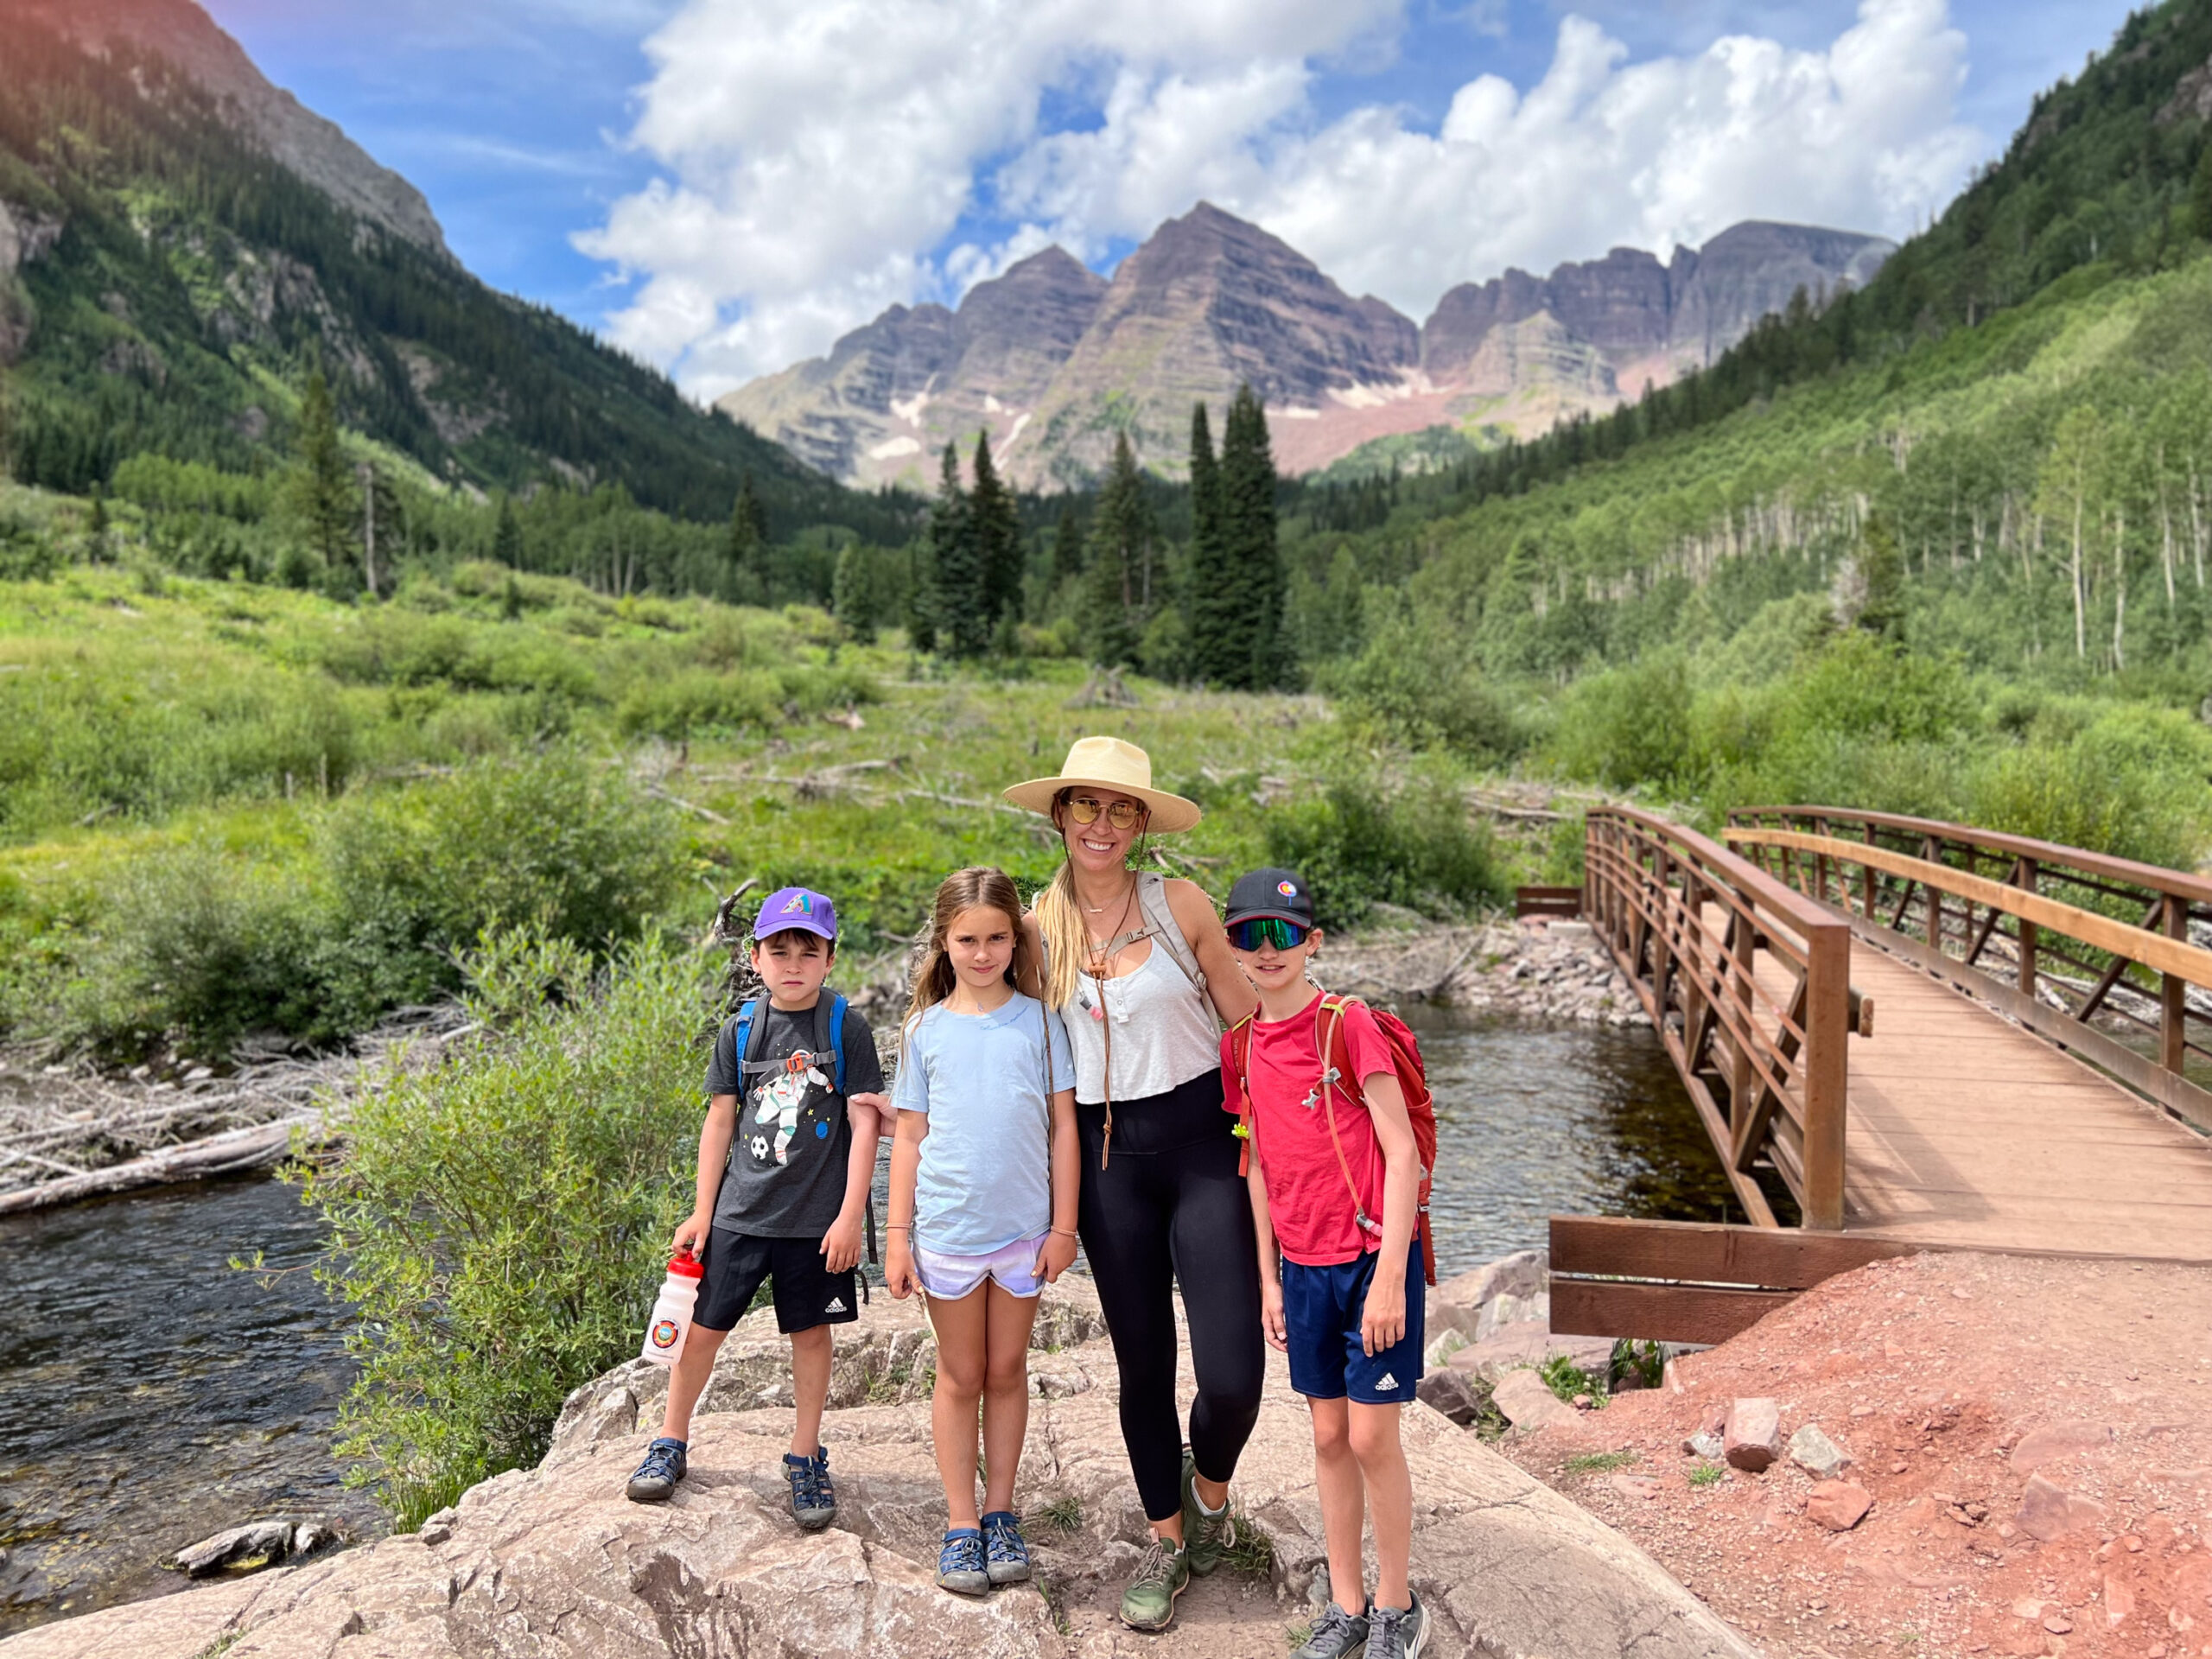 a visit to maroon lake at maroon bells, above Aspen with the kiddos #theldltravels #maroonbells #outdoorsy